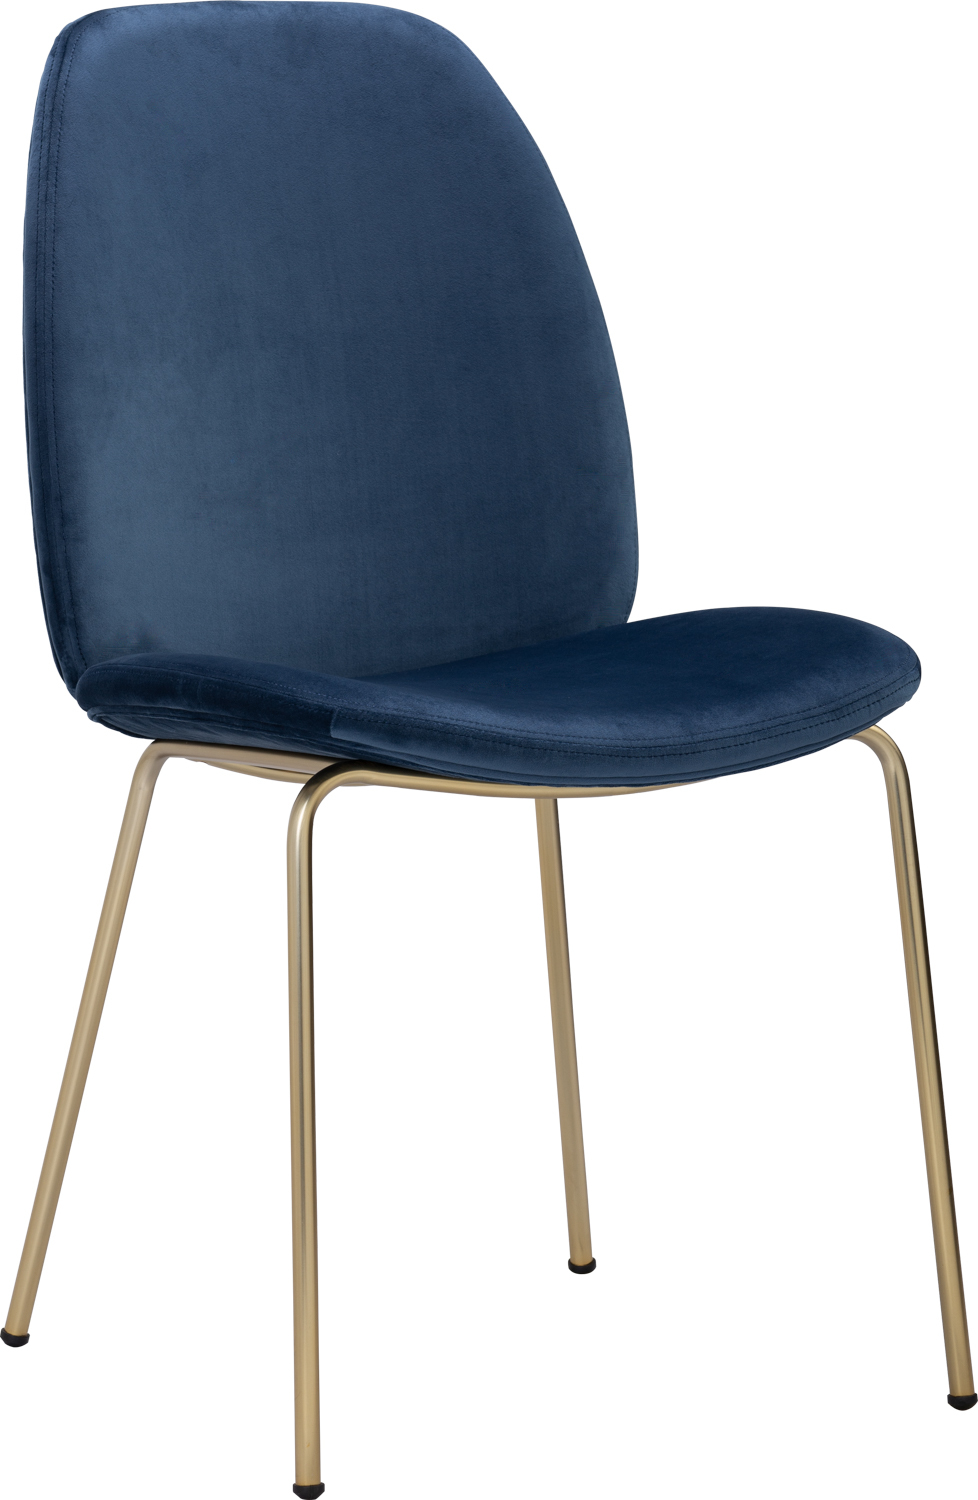 ADELE DINING CHAIR 808/3608